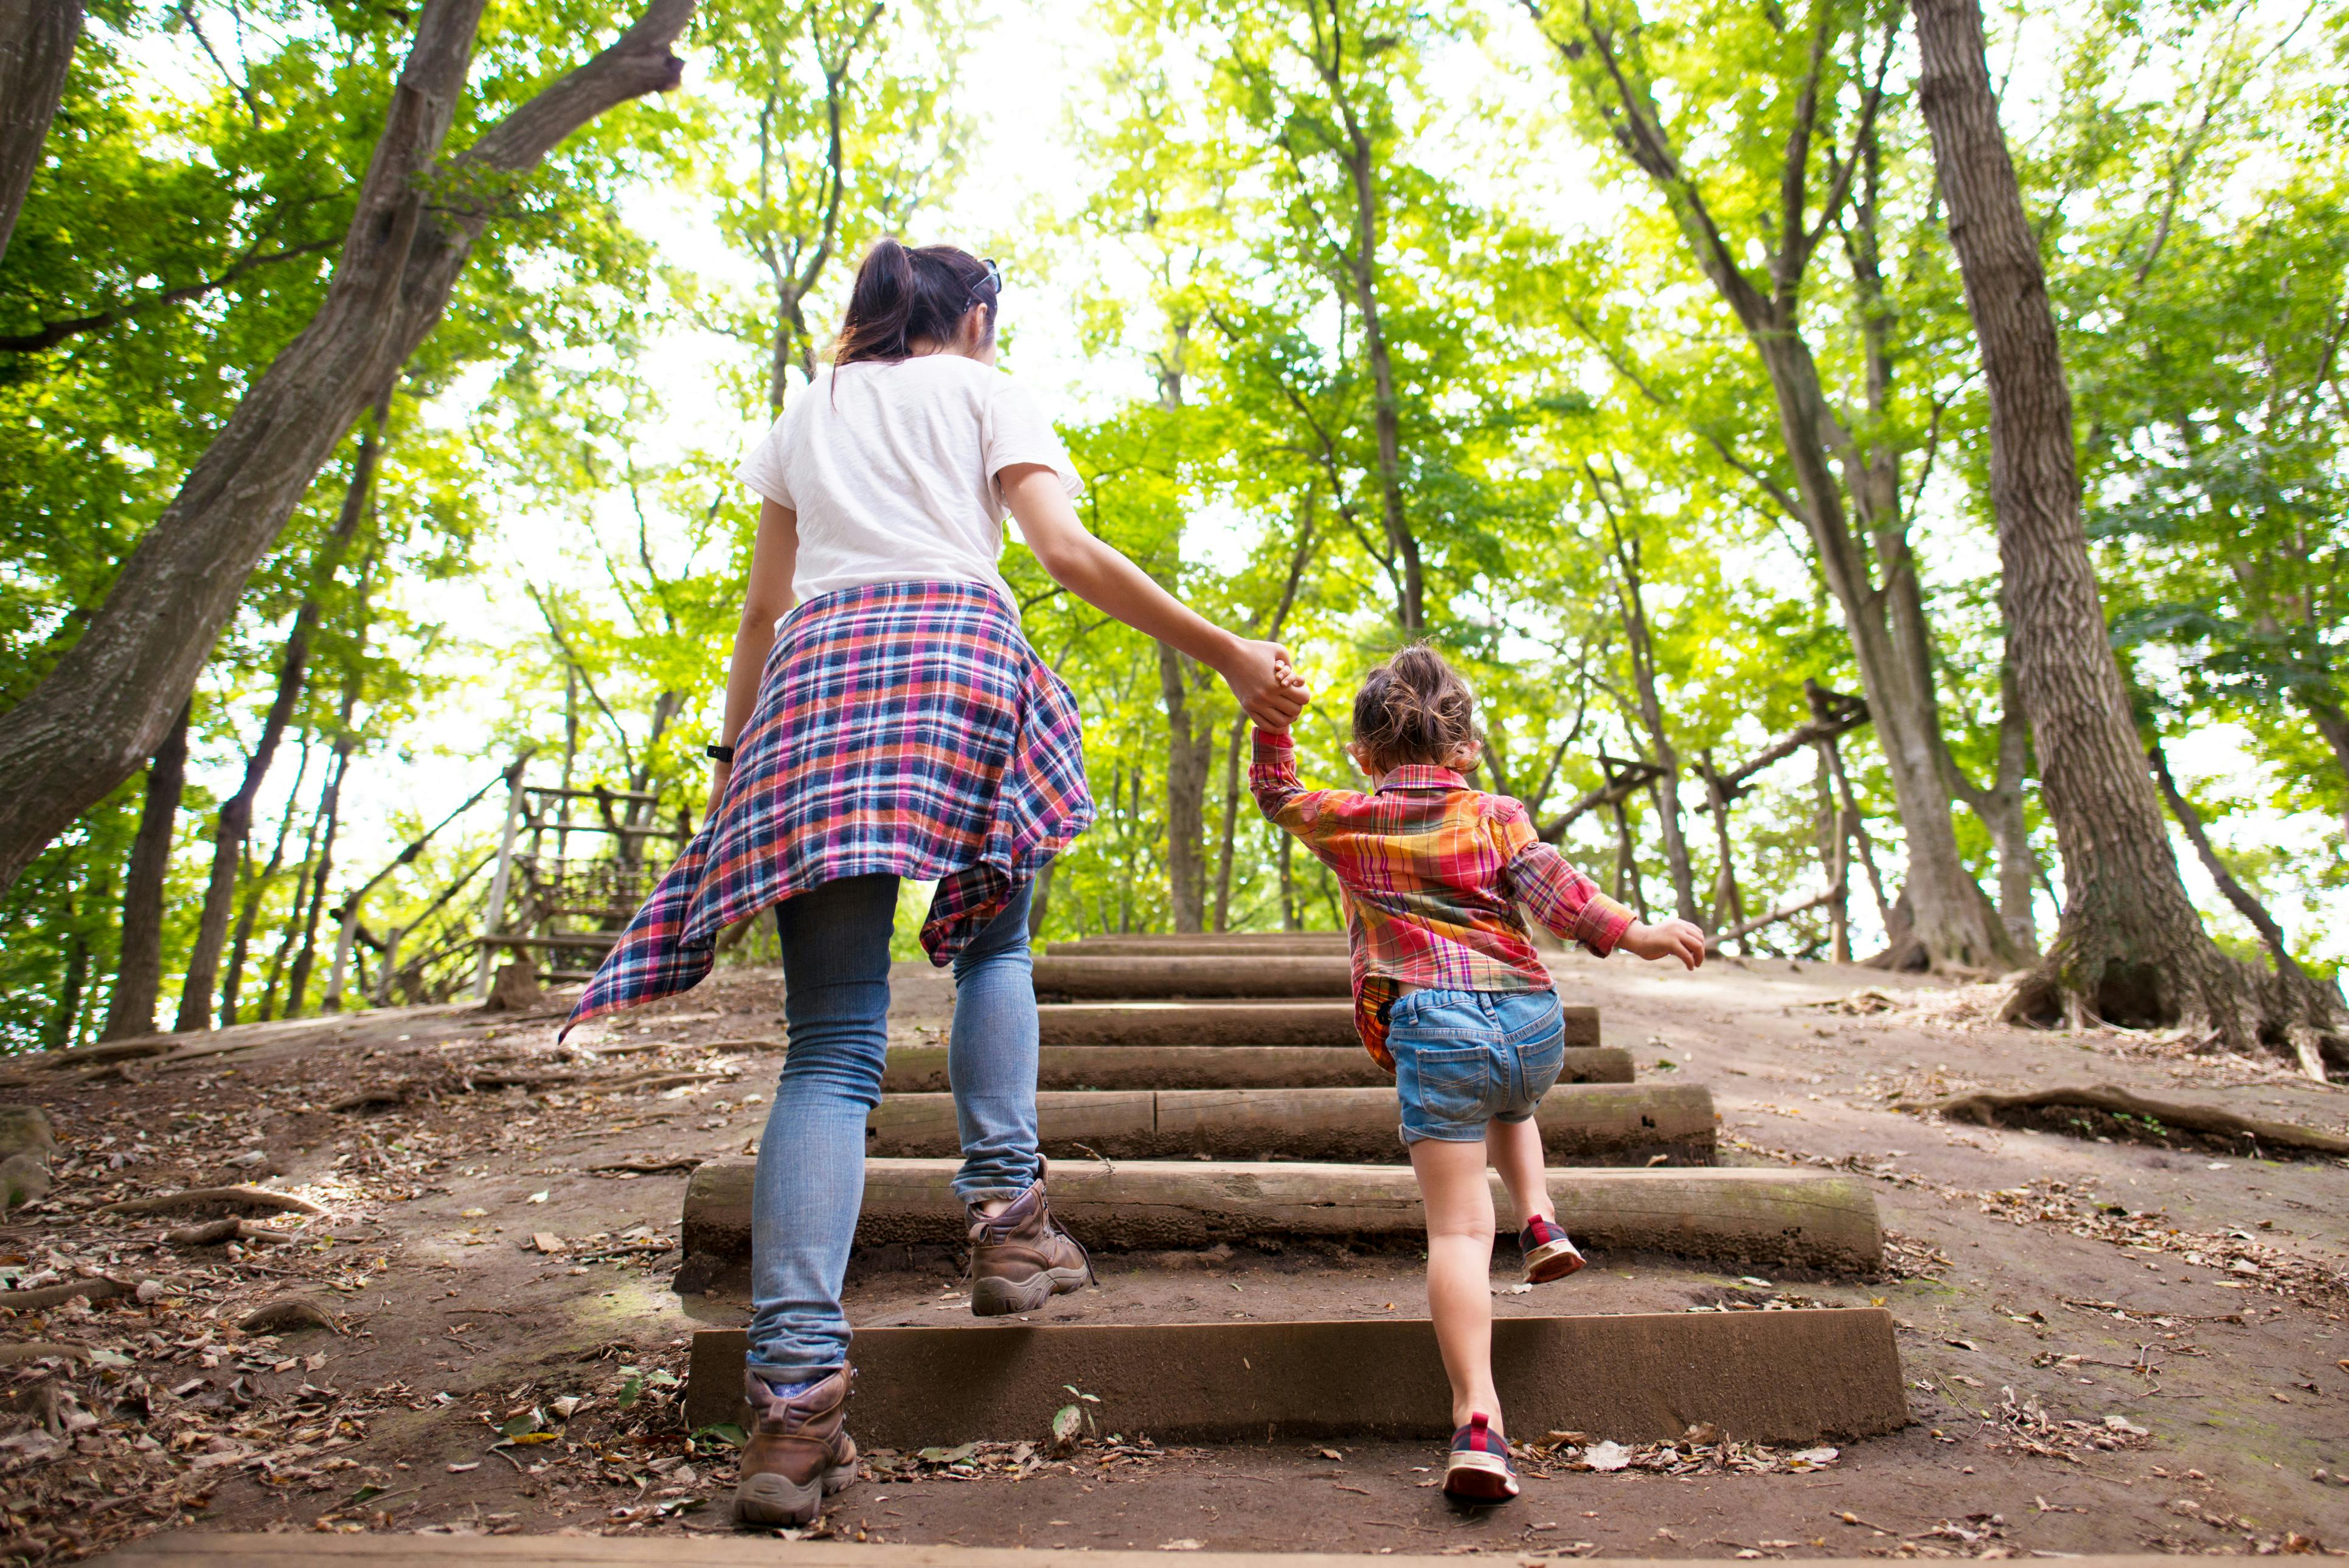 A mom and a daughter climb up wooden steps in a wooded area